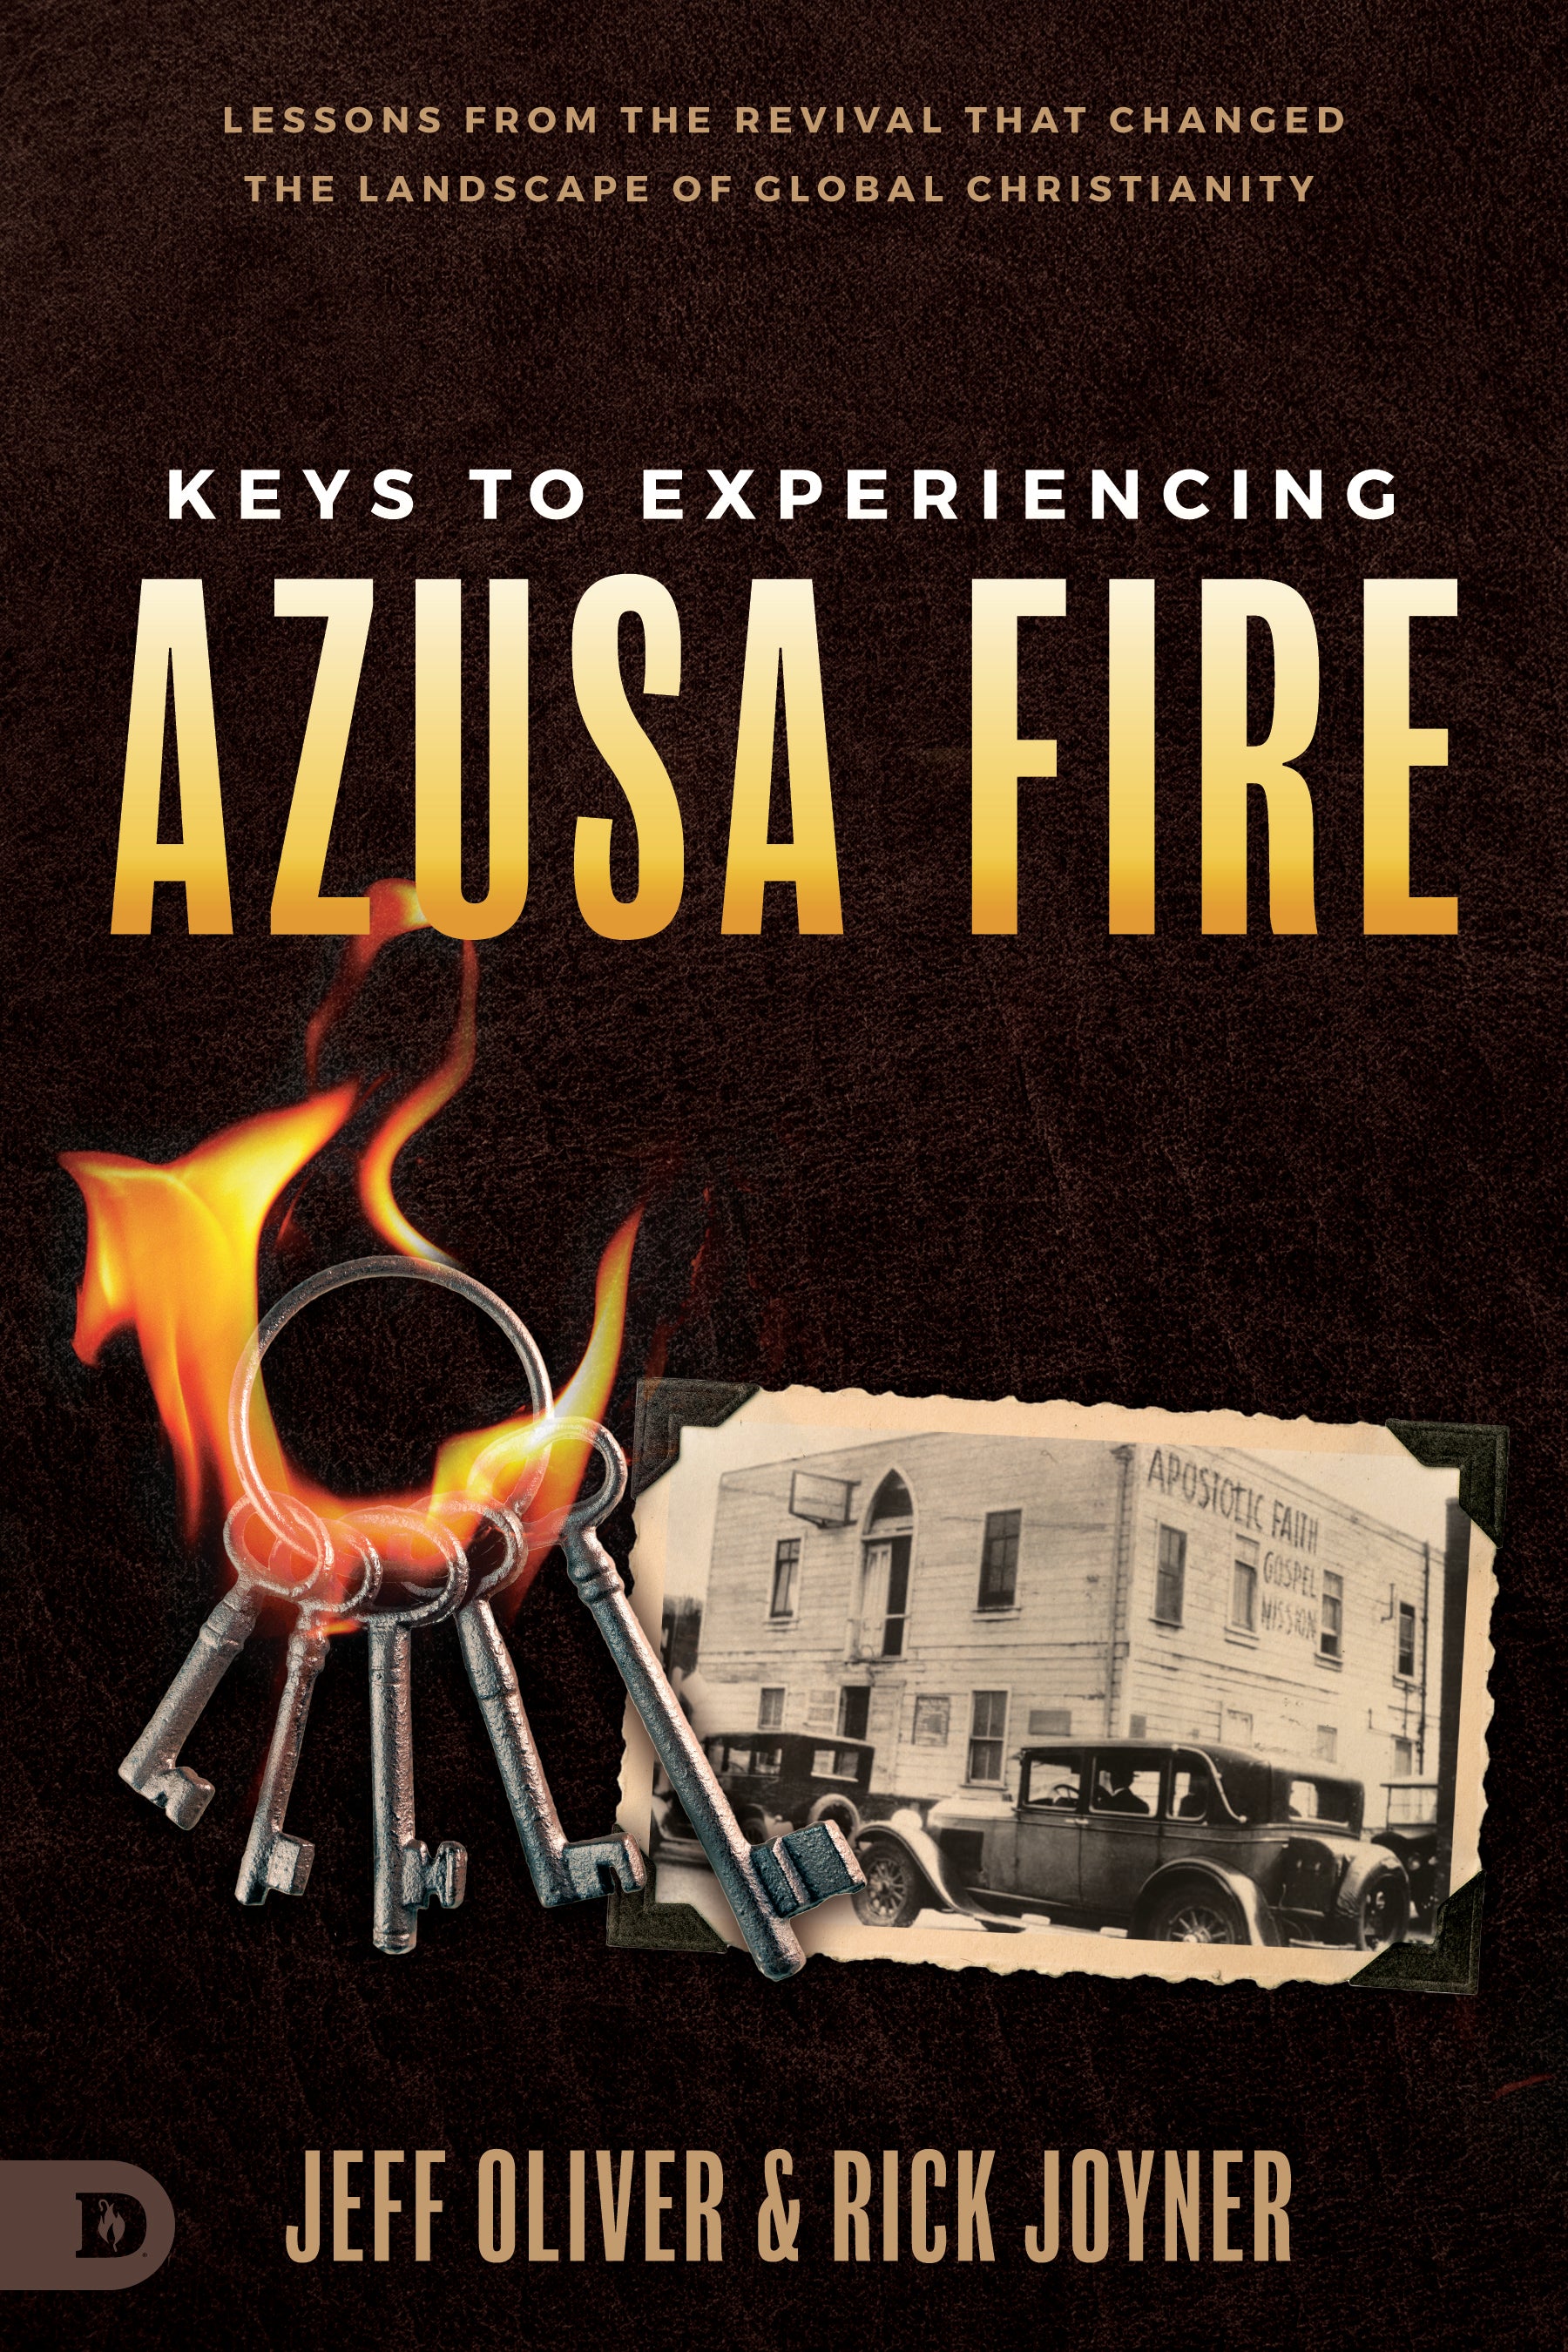 PRE-ORDER NOW!!! Keys to Experiencing Azusa Fire: Lessons from the Revival that Changed the Landscape of Global Christianity